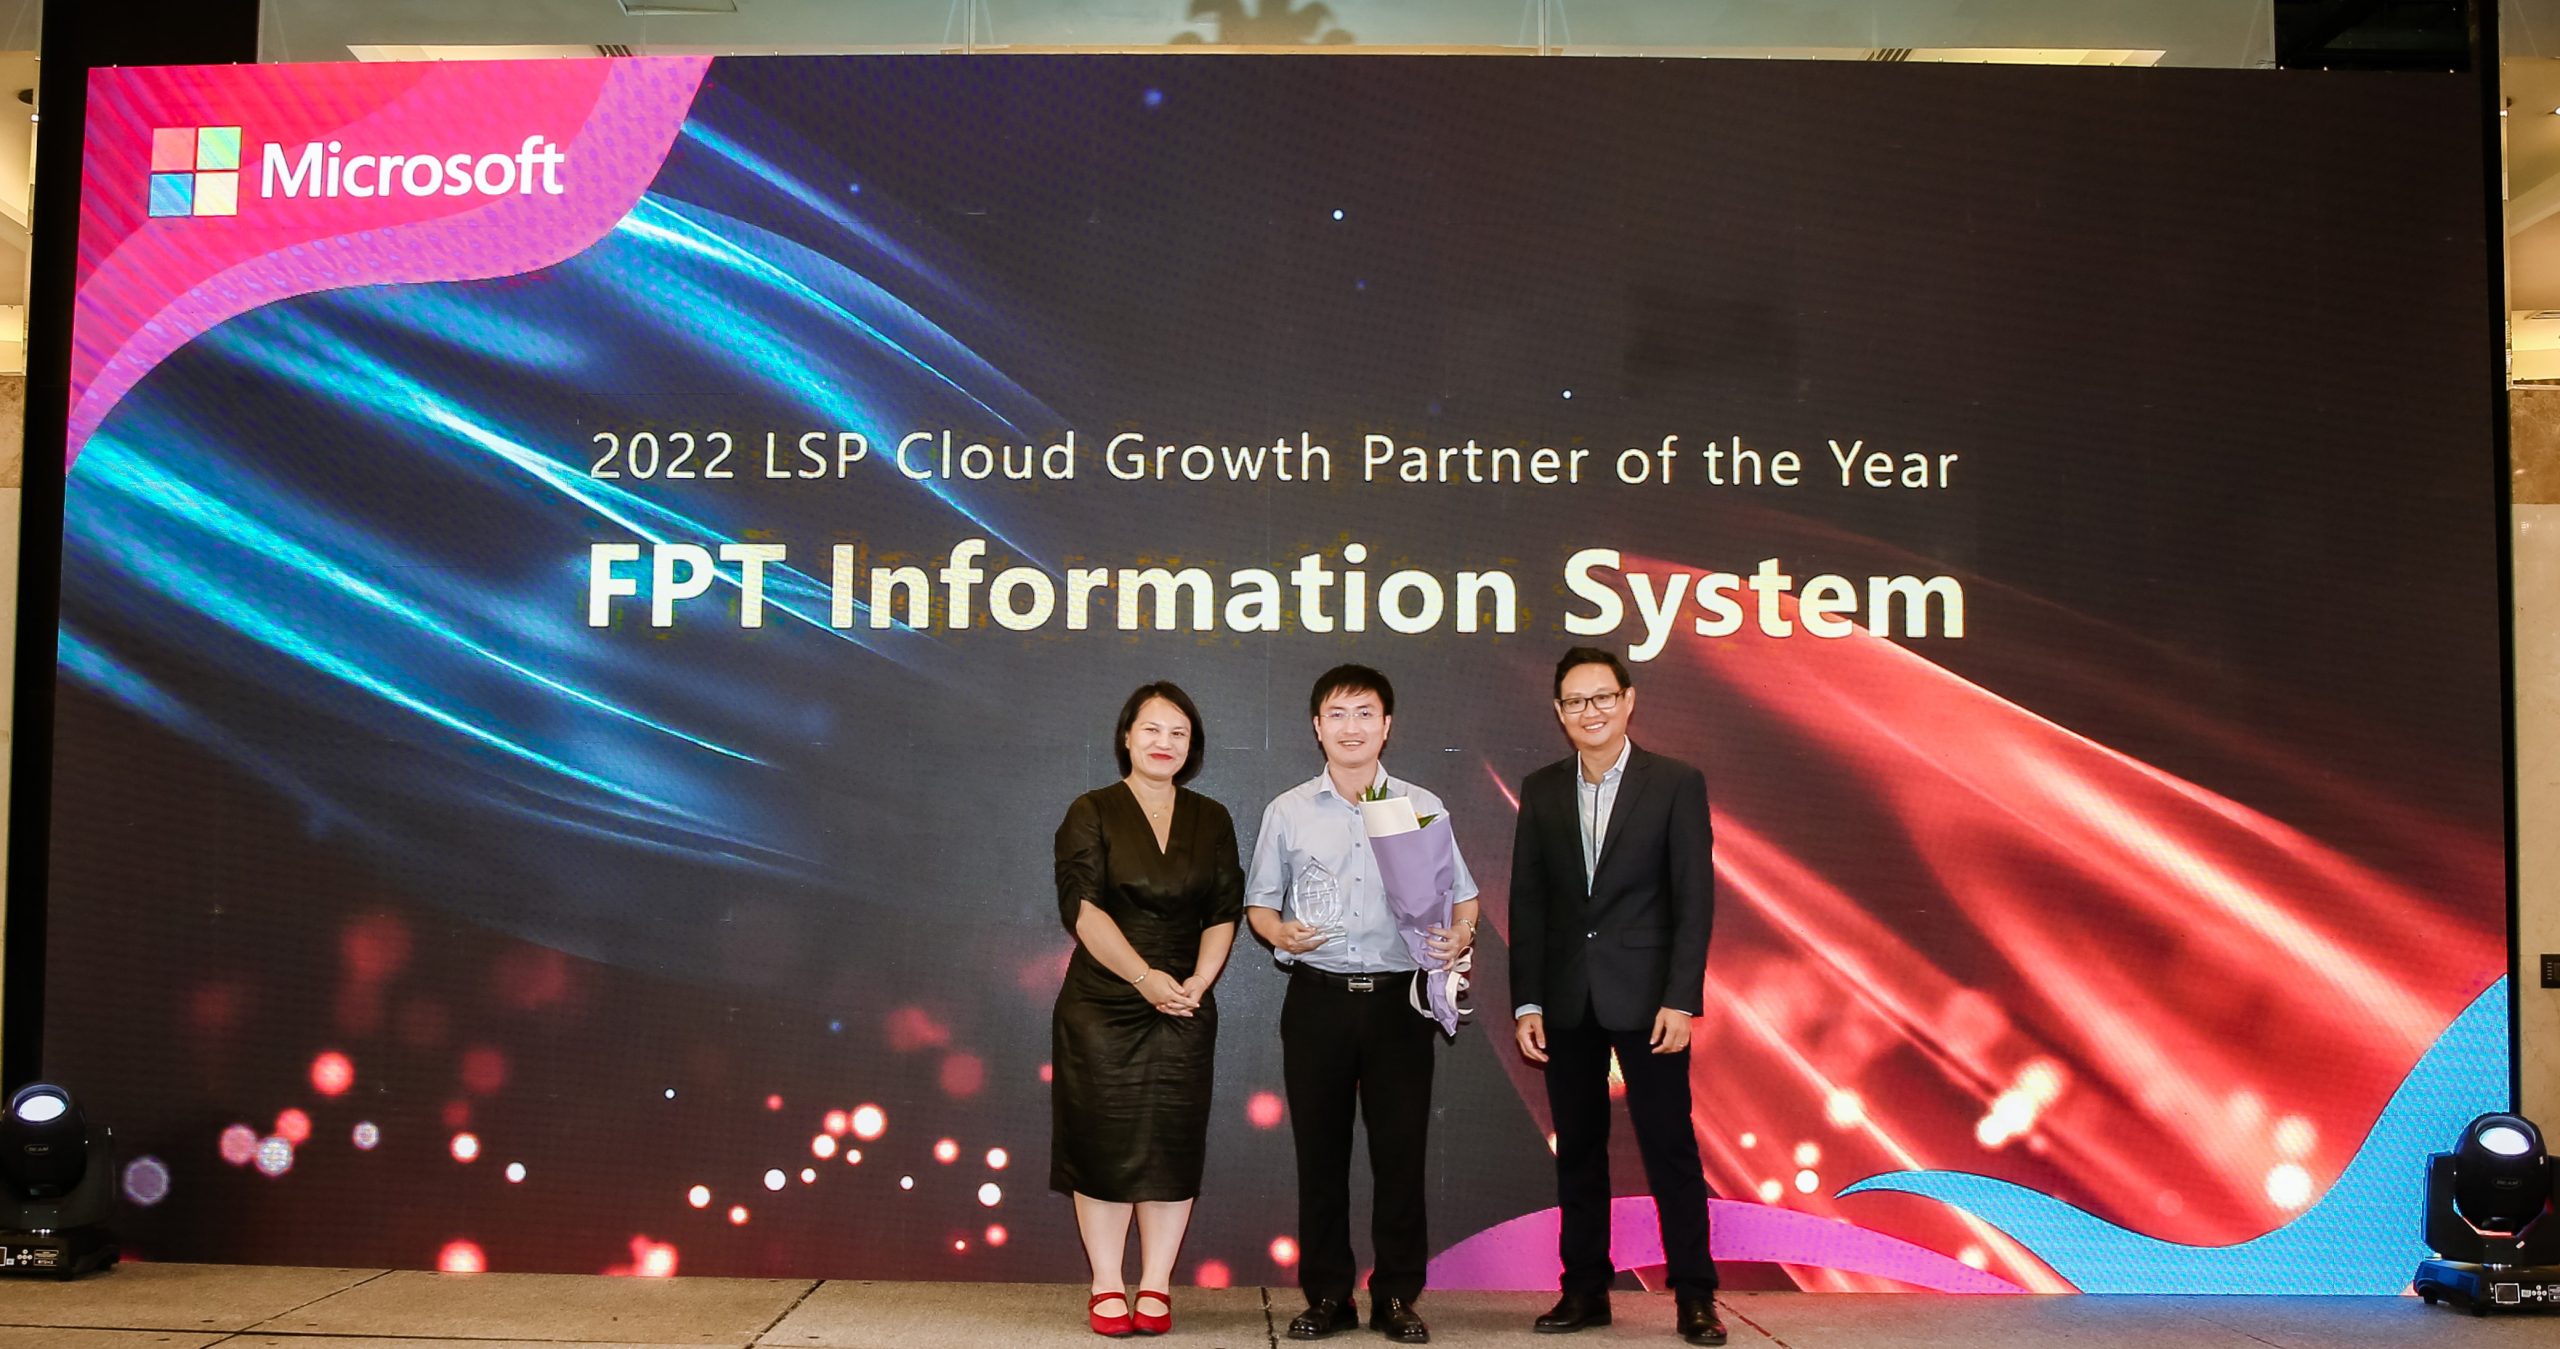 Microsoft 2022 LSP Cloud Growth Partner of the Year